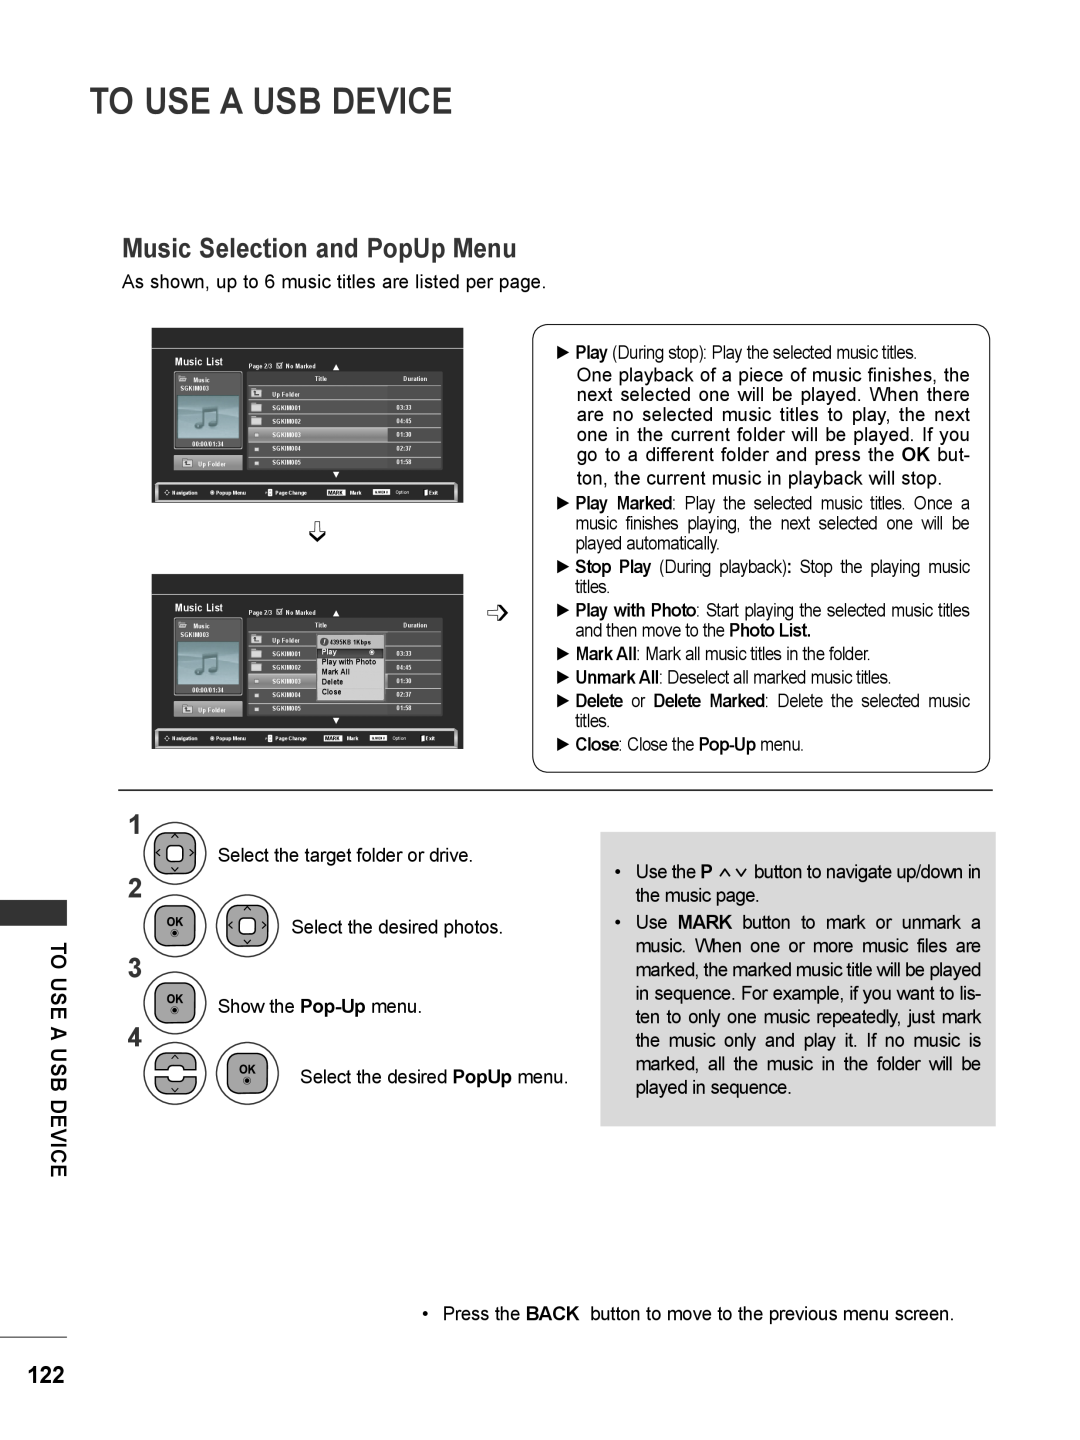 LG Electronics M2380DN, M2780DF, M2780DN, M2380DB, M2380DF, M2280DN, M2080D Music Selection and PopUp Menu, To Use A Usb Device 